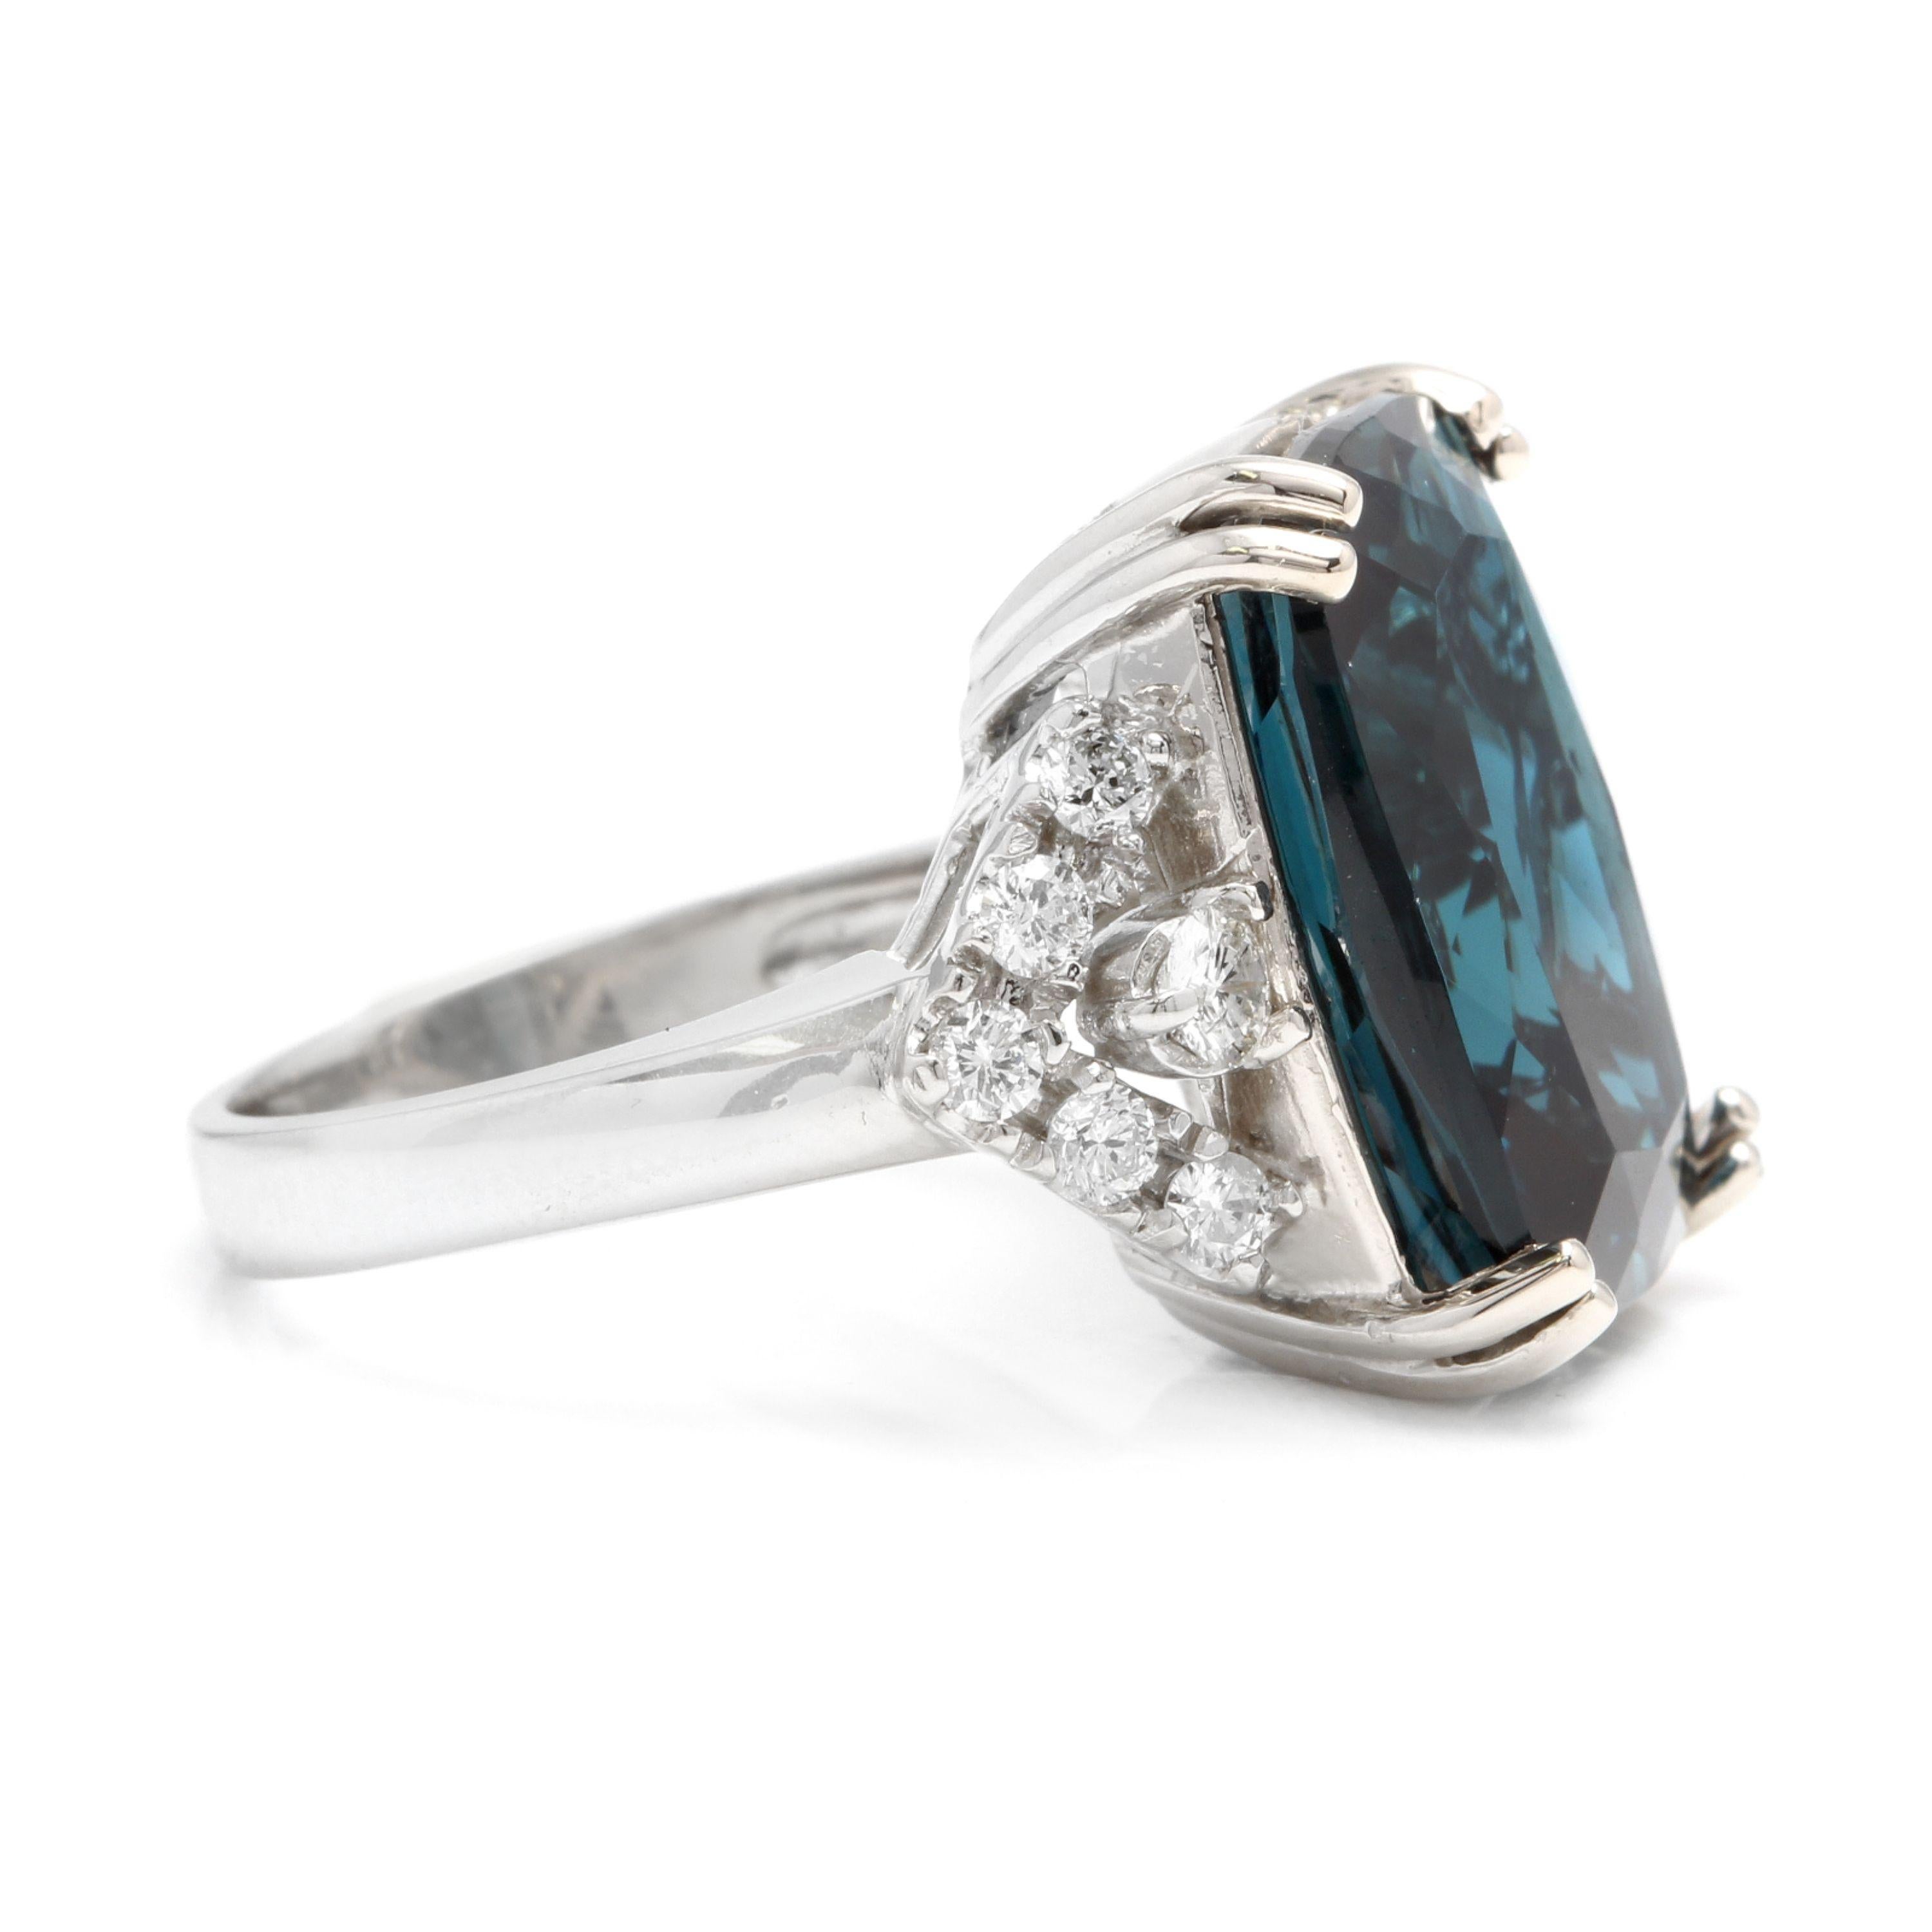 Mixed Cut 13.70 Carat Natural Impressive London Blue Topaz and Diamond 14k White Gold Ring For Sale